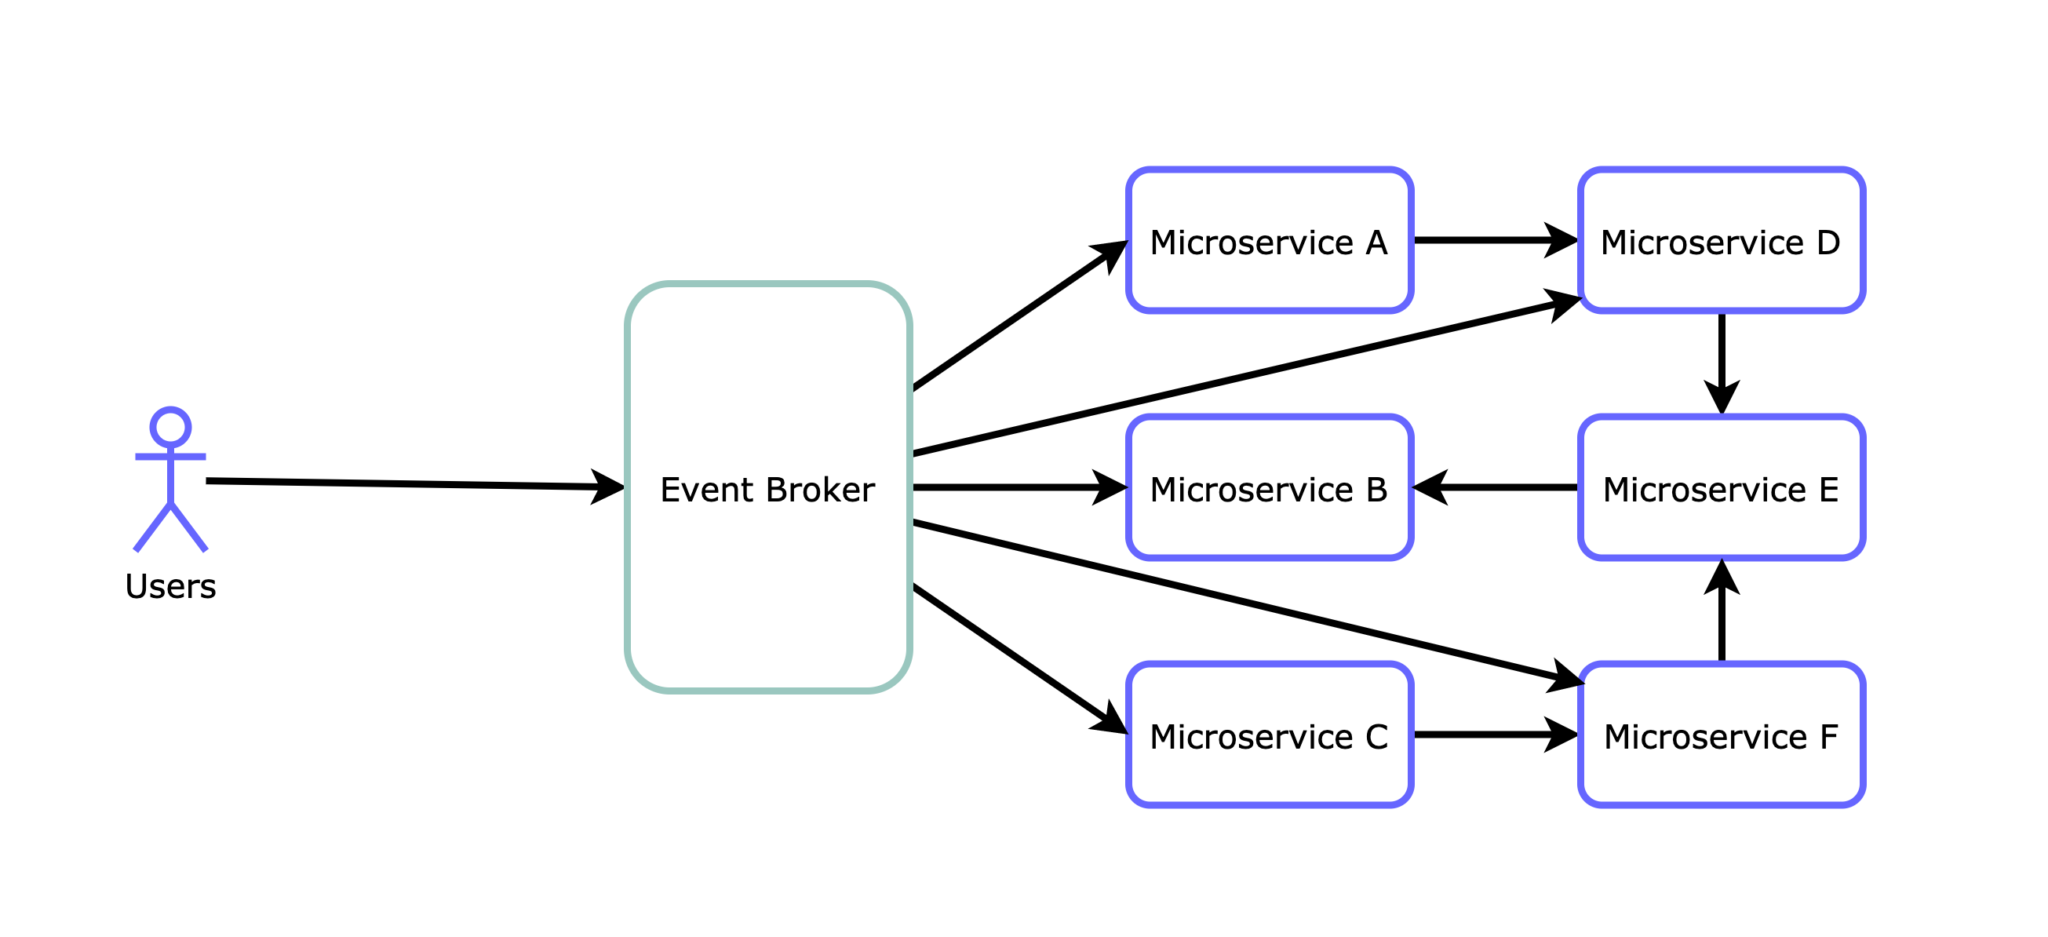 Microservices architecture - orchestrator, choreography, hybrid